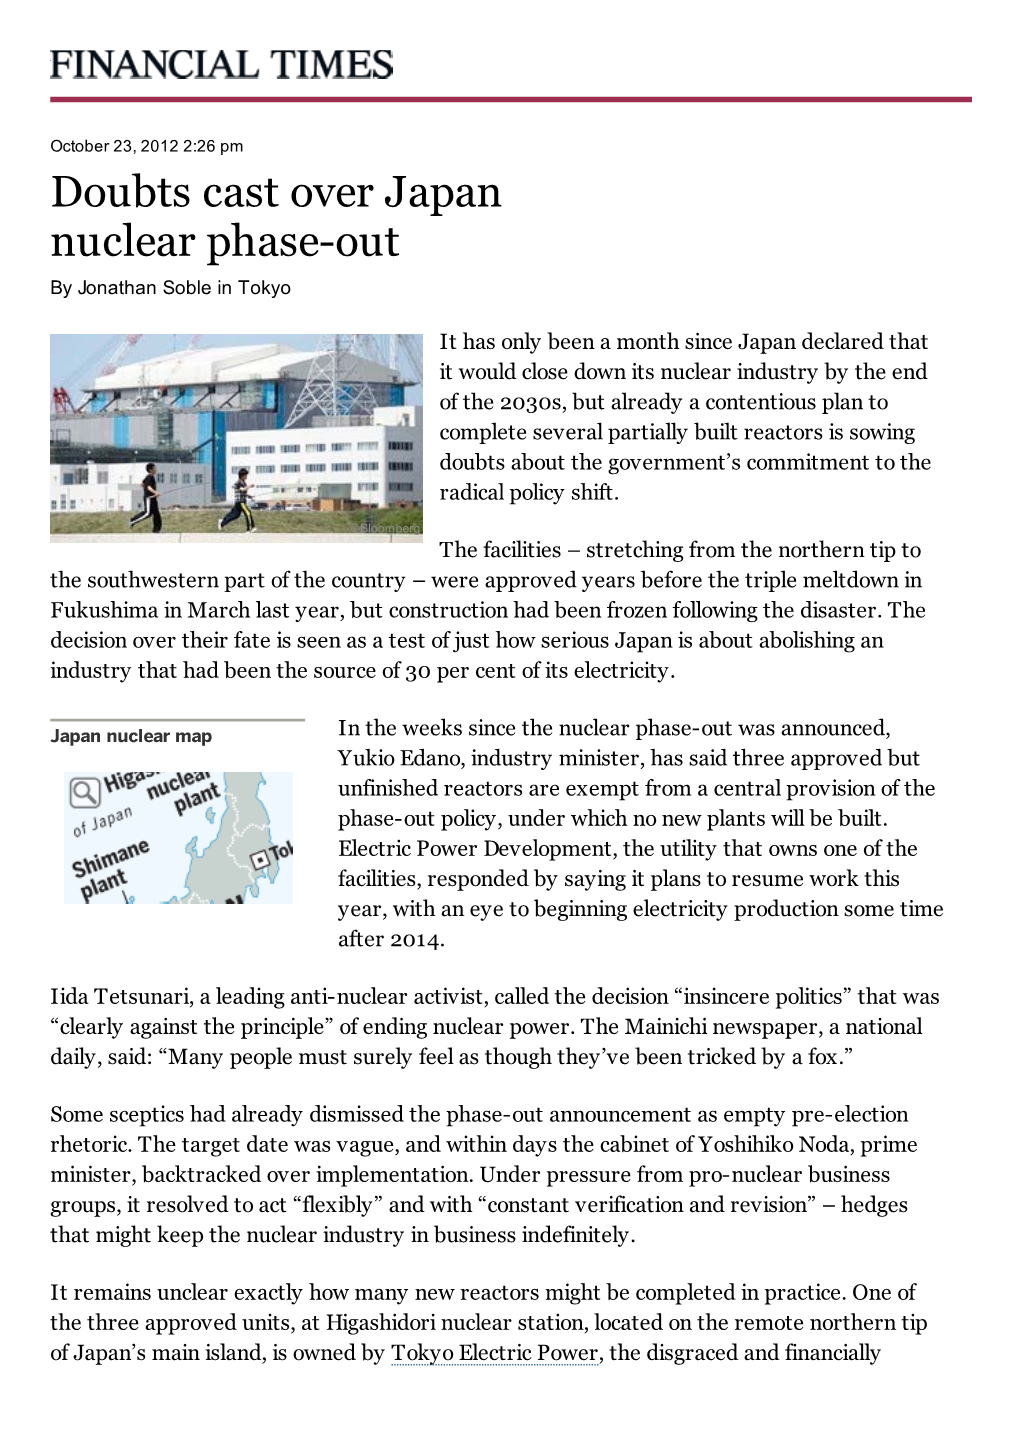 Doubts Cast Over Japan Nuclear Phase-Out - FT.Com